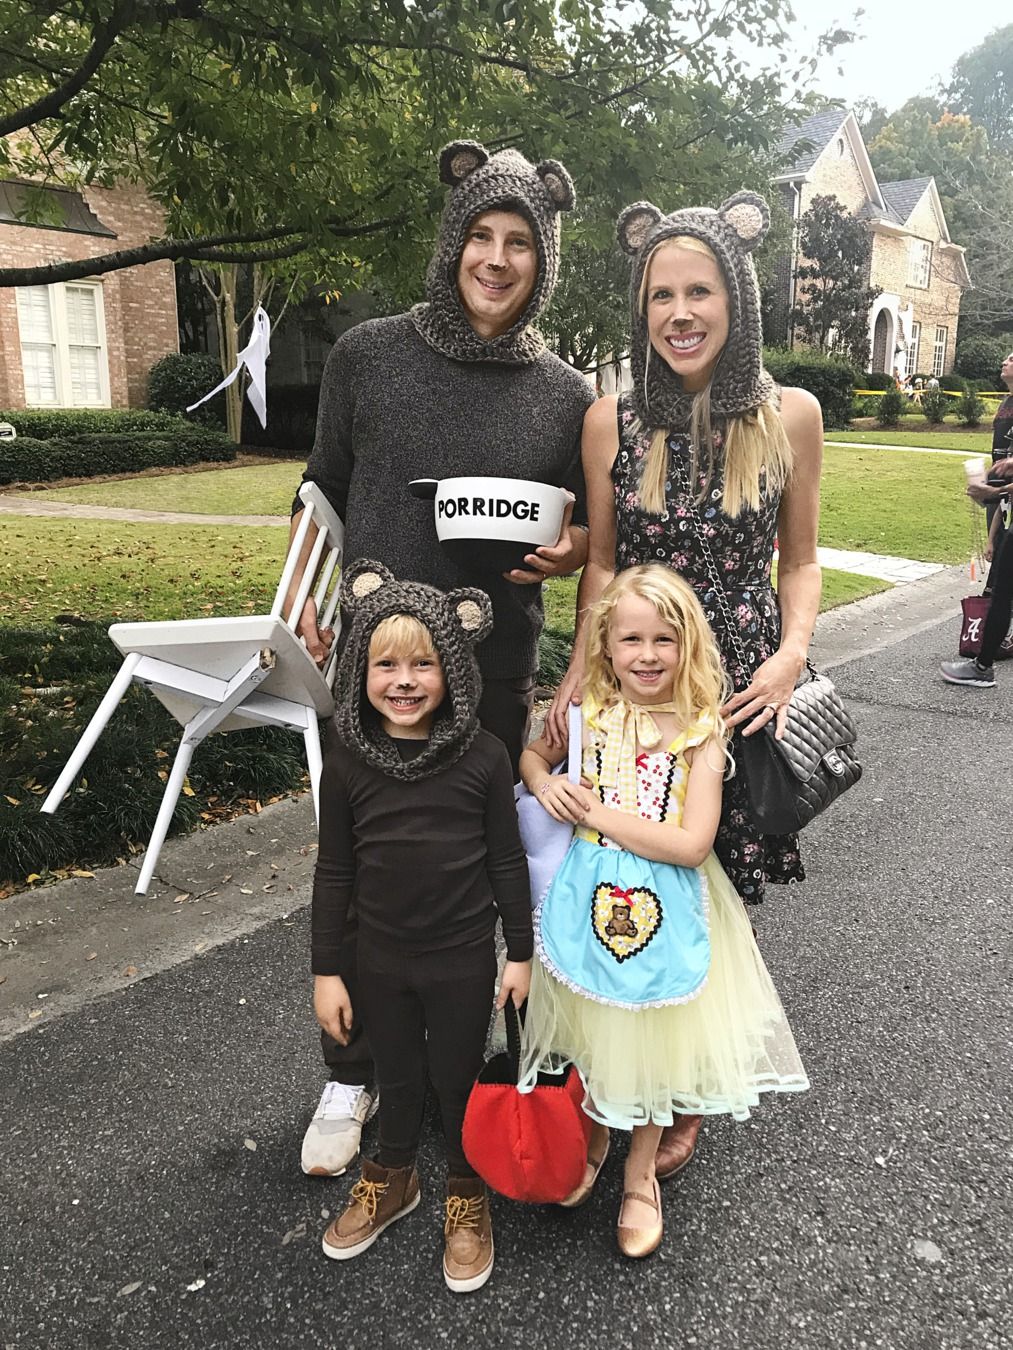 couples costumes with baby